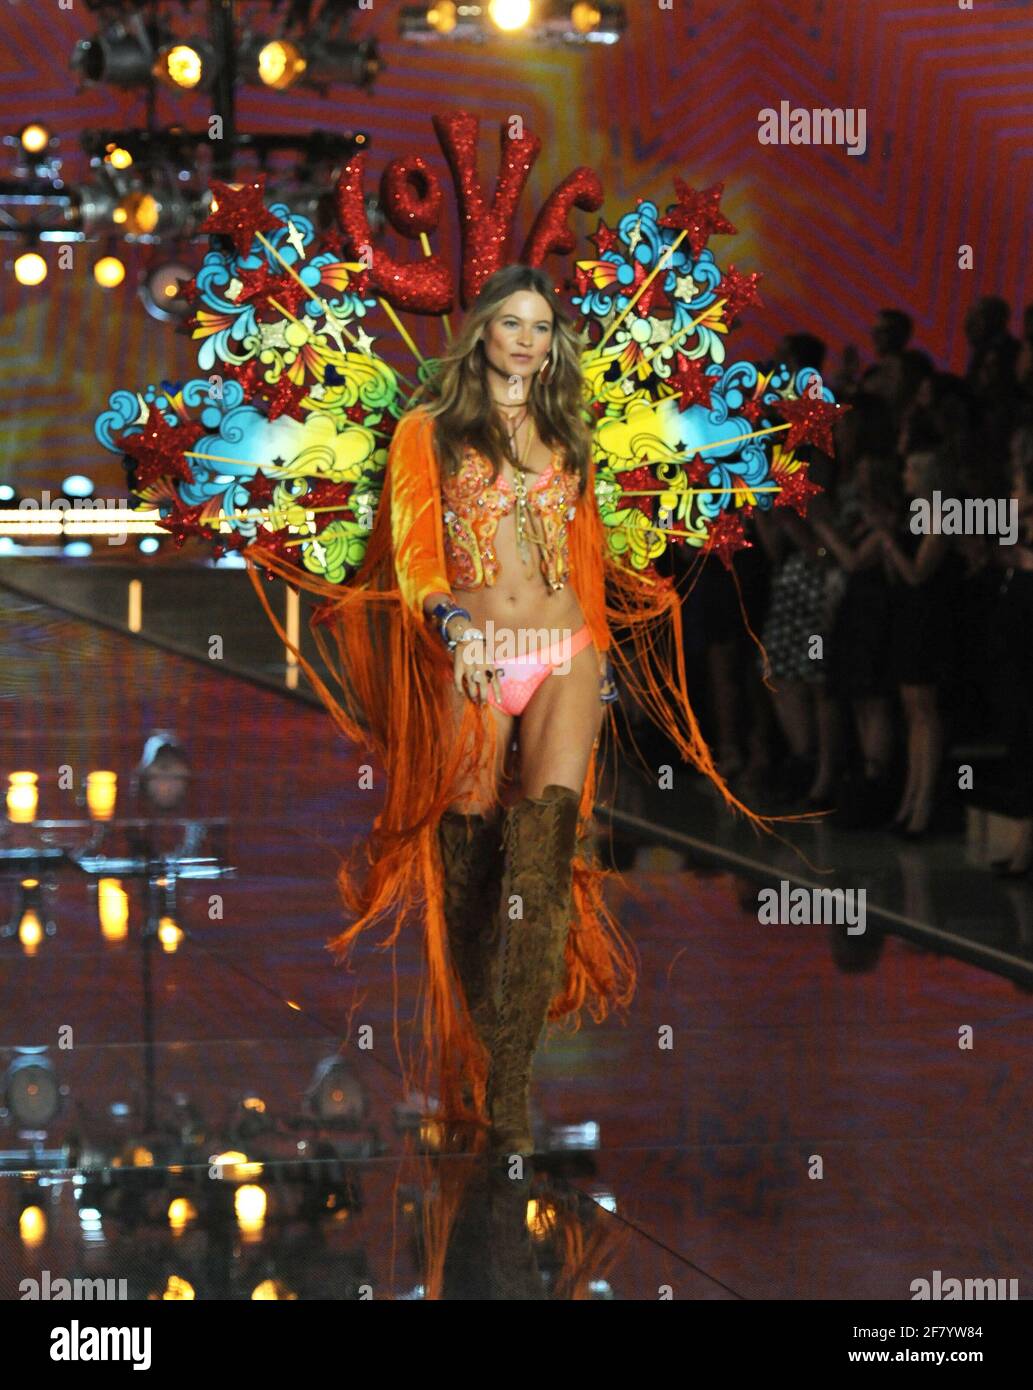 Behati Prinsloo on the runway during the 2015 Victoria's Secret Fashion Show, held at the Lexington Avenue Armory, Tuesday, November 10, 2015 in New York City. Photo by Jennifer Graylock-Graylock.com 917-519-7666 Stock Photo